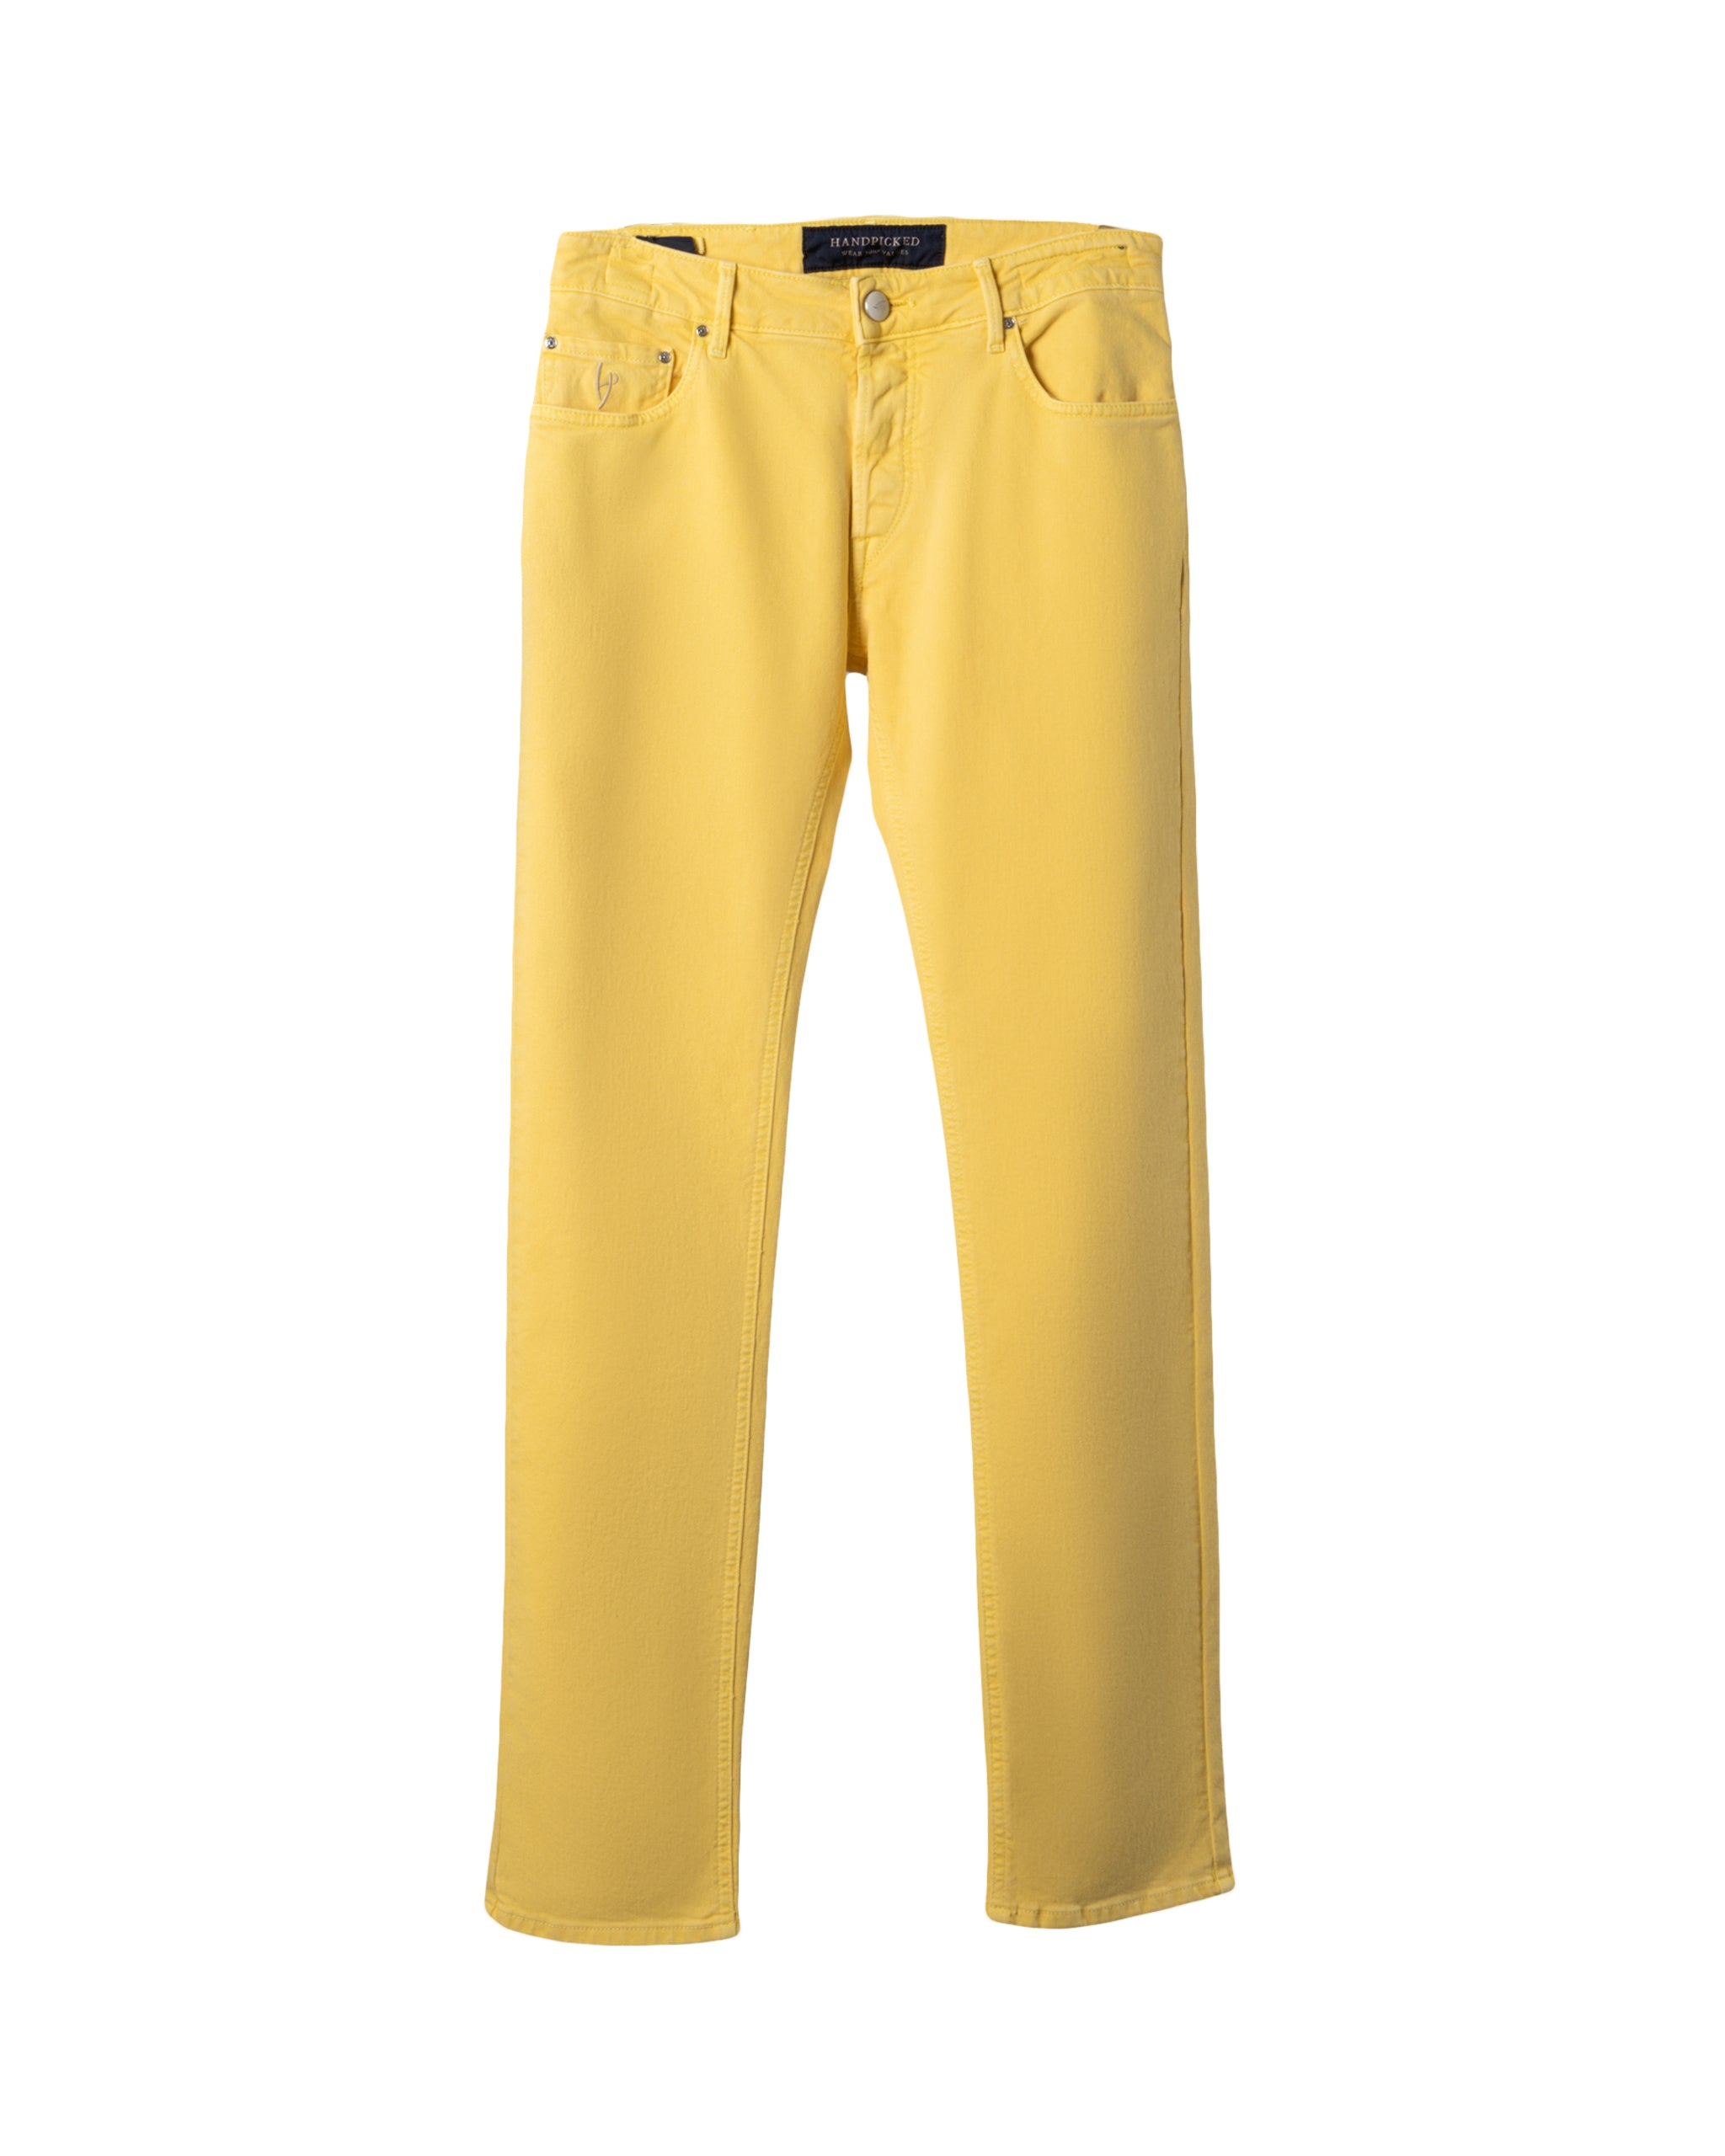 RAVELLO BLUE LEATHER PATCH PANTS